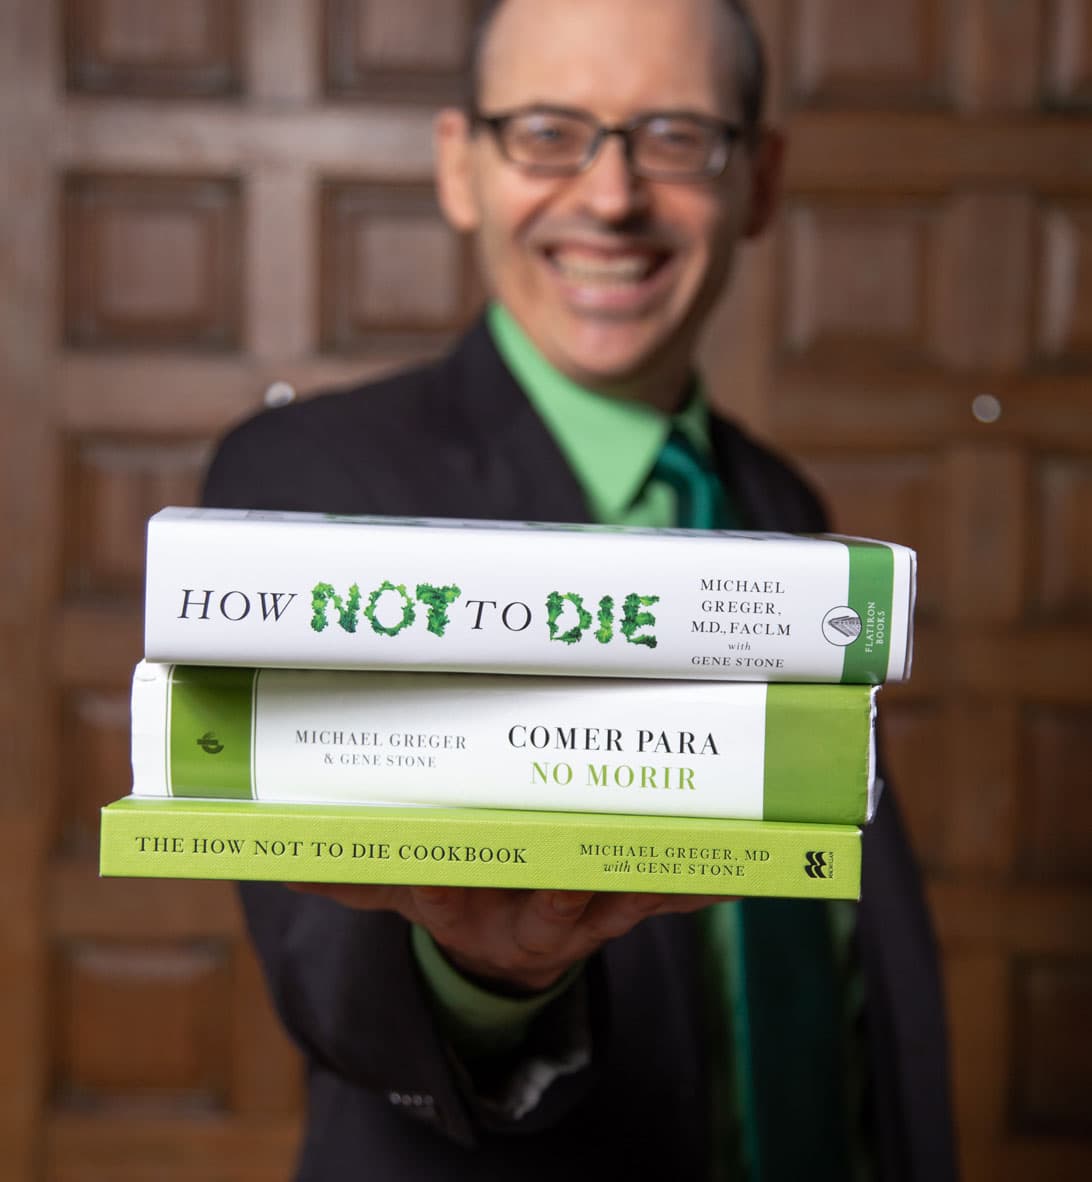 Picture of Michael Greger holding his books